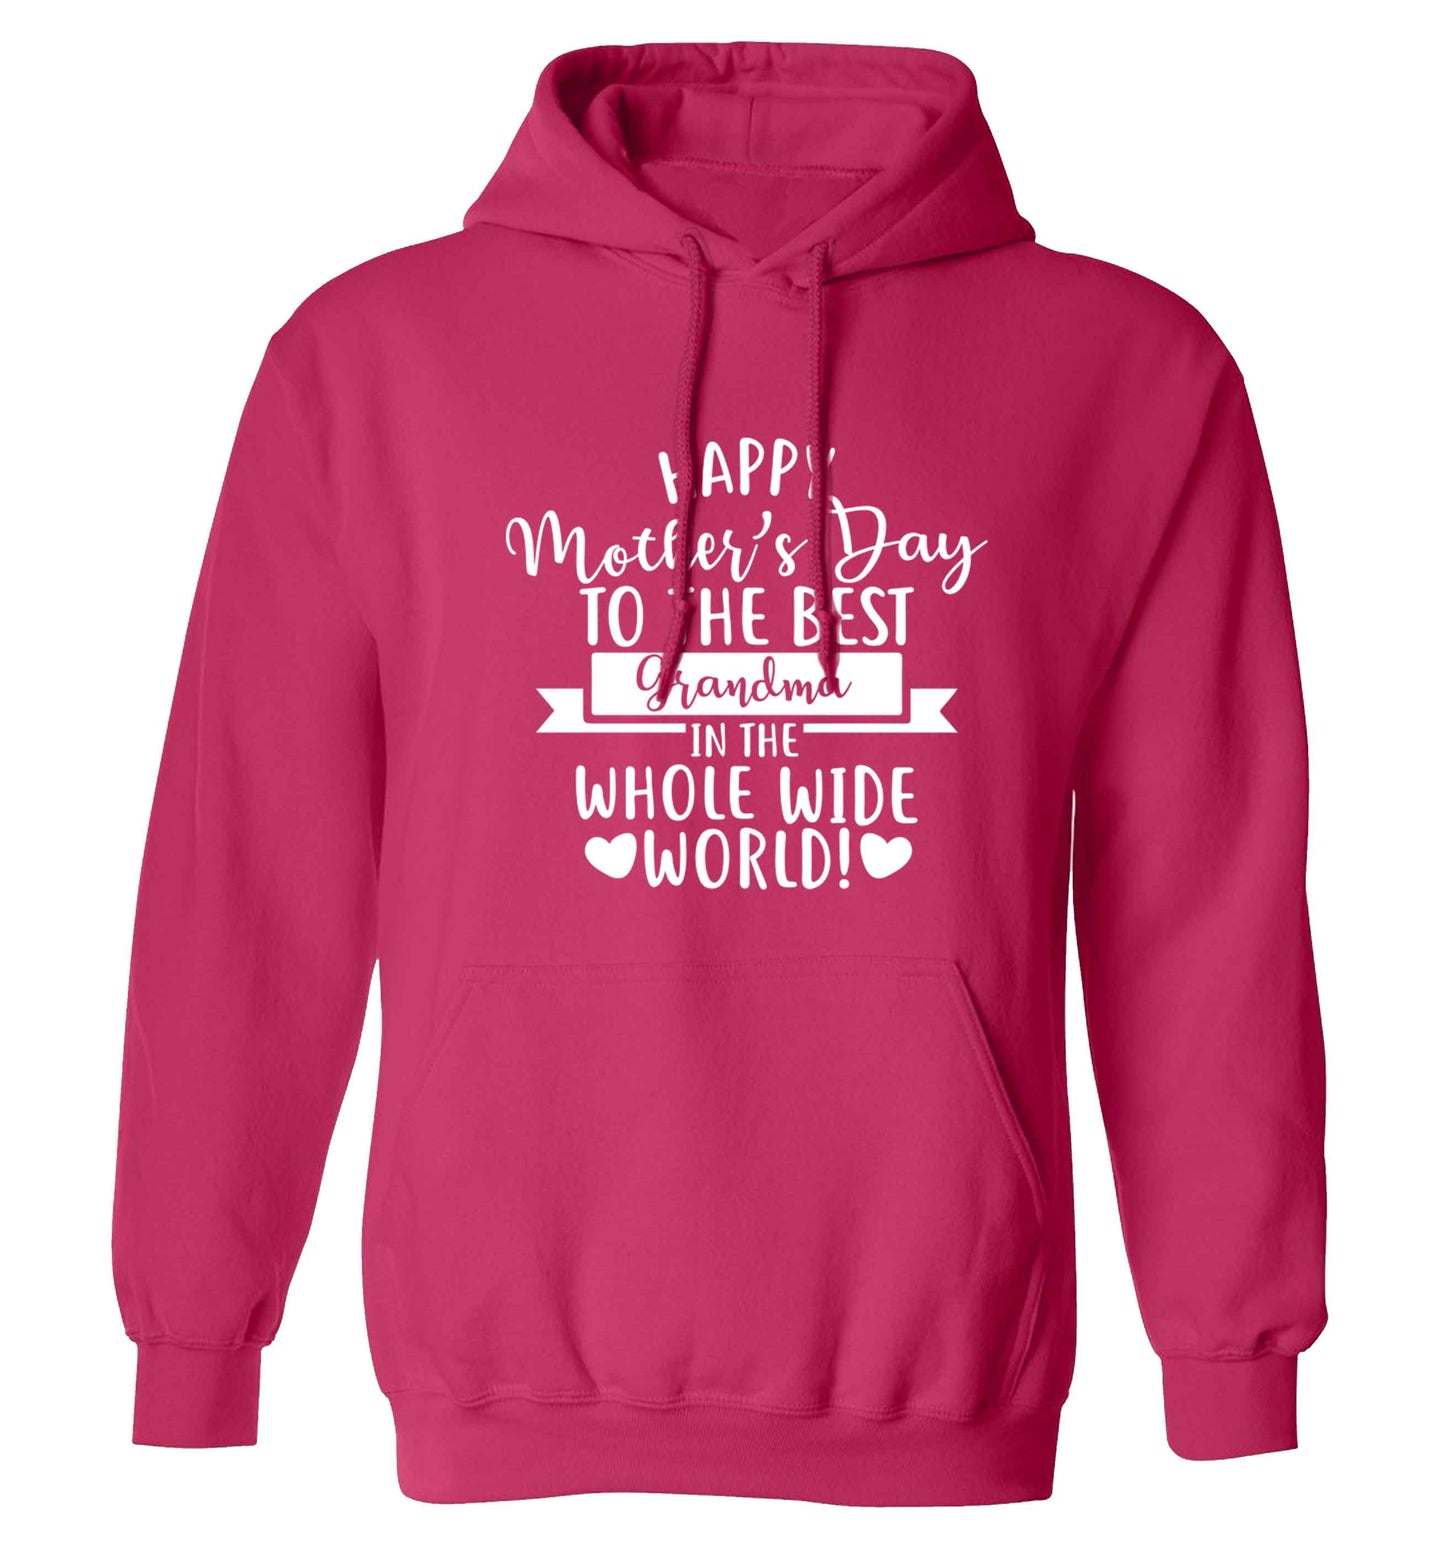 Happy mother's day to the best grandma in the world adults unisex pink hoodie 2XL